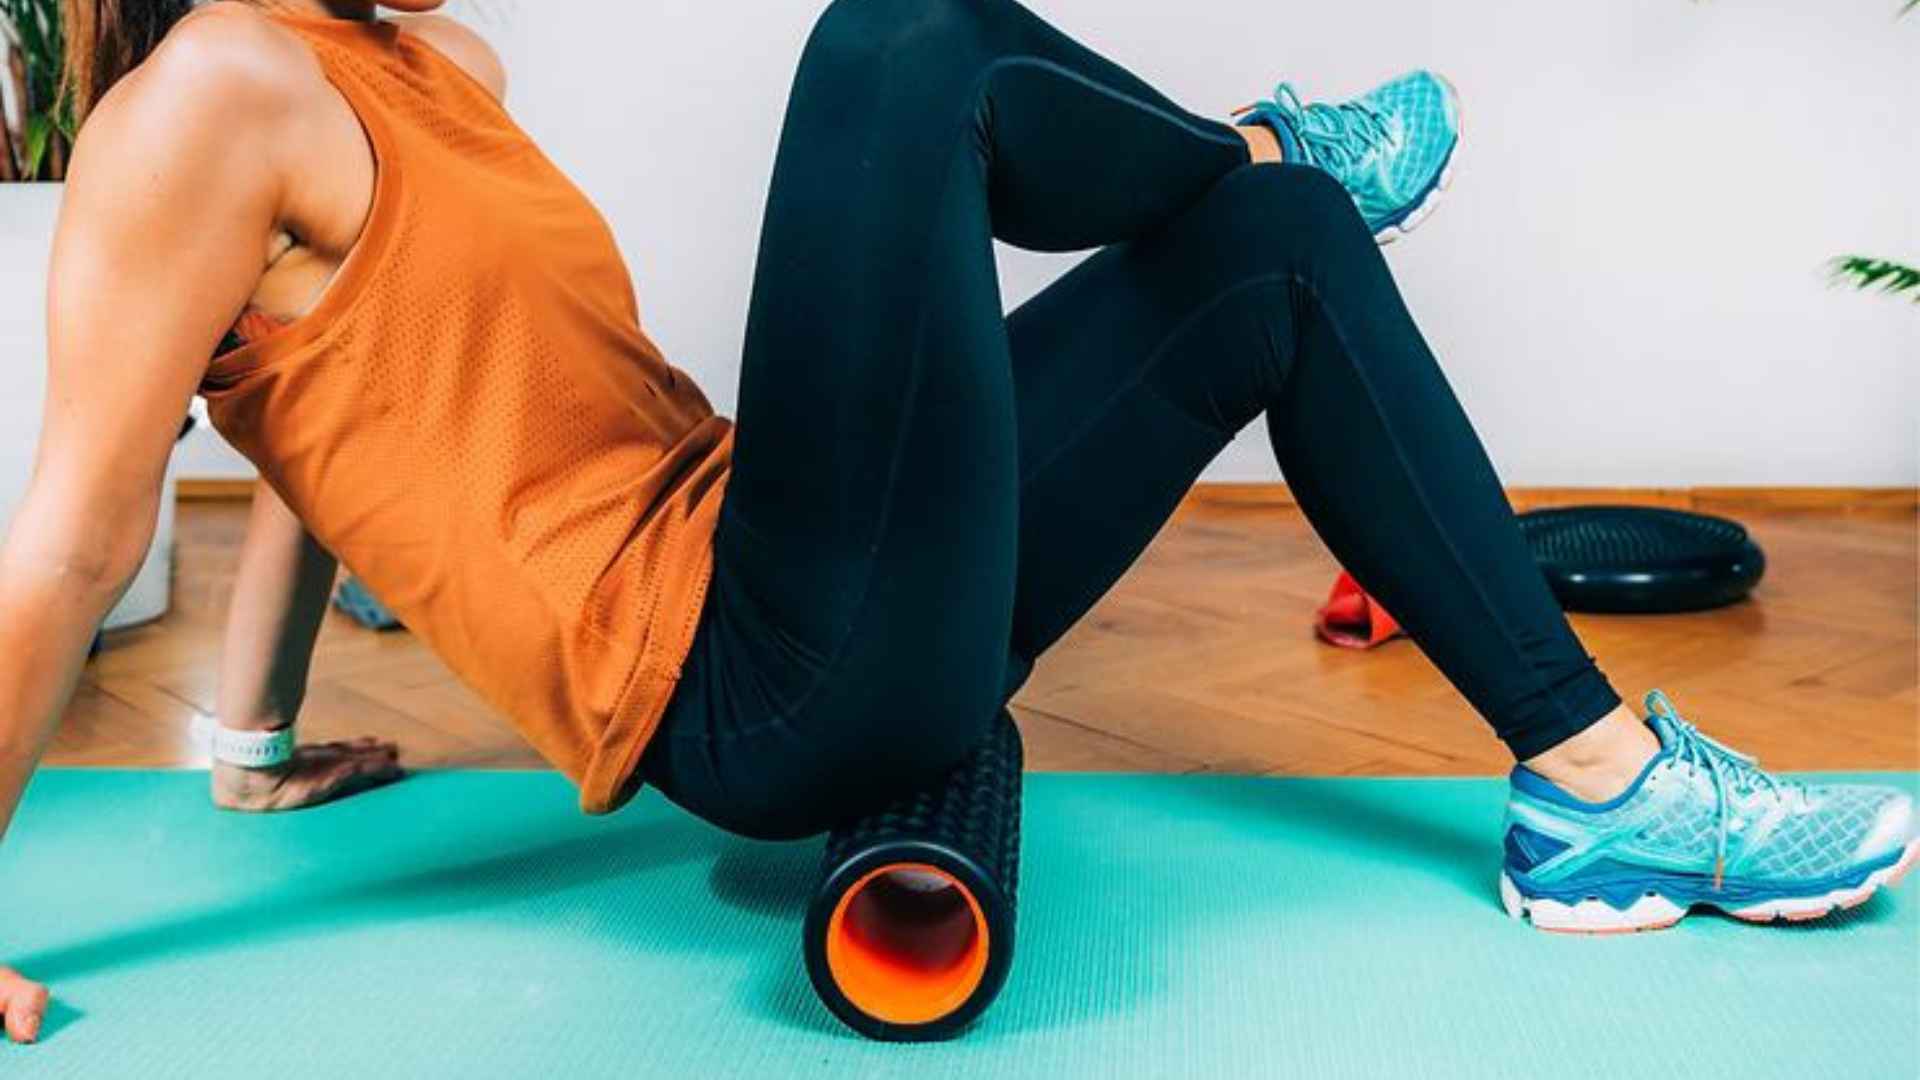 A woman in exercise clothing using a foam roller